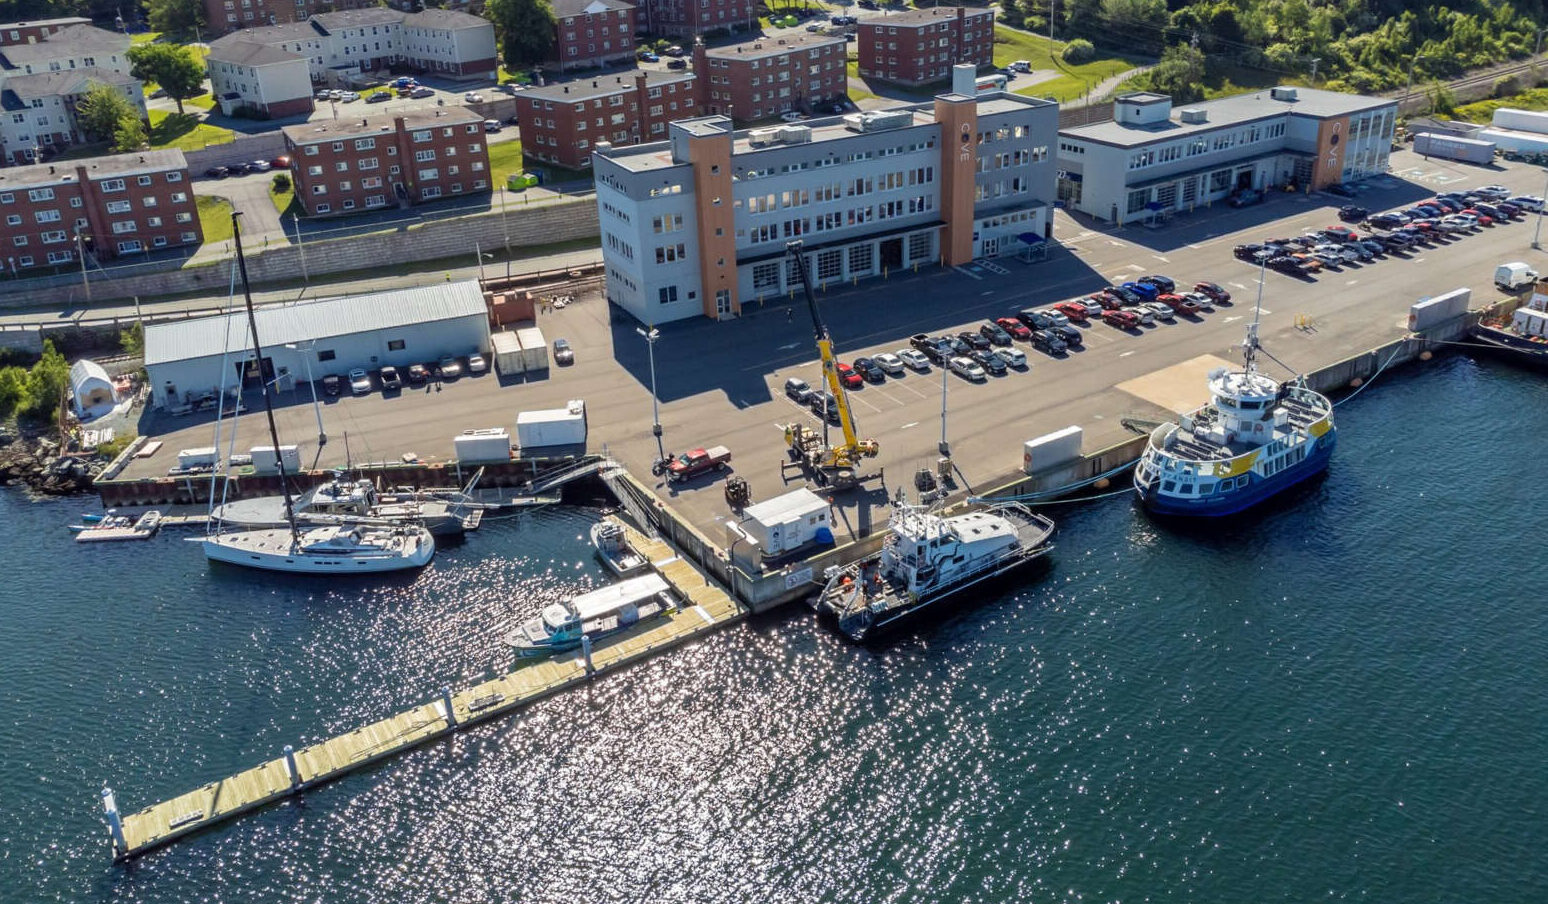 Aerial photo of waterfront building complex and boats docked